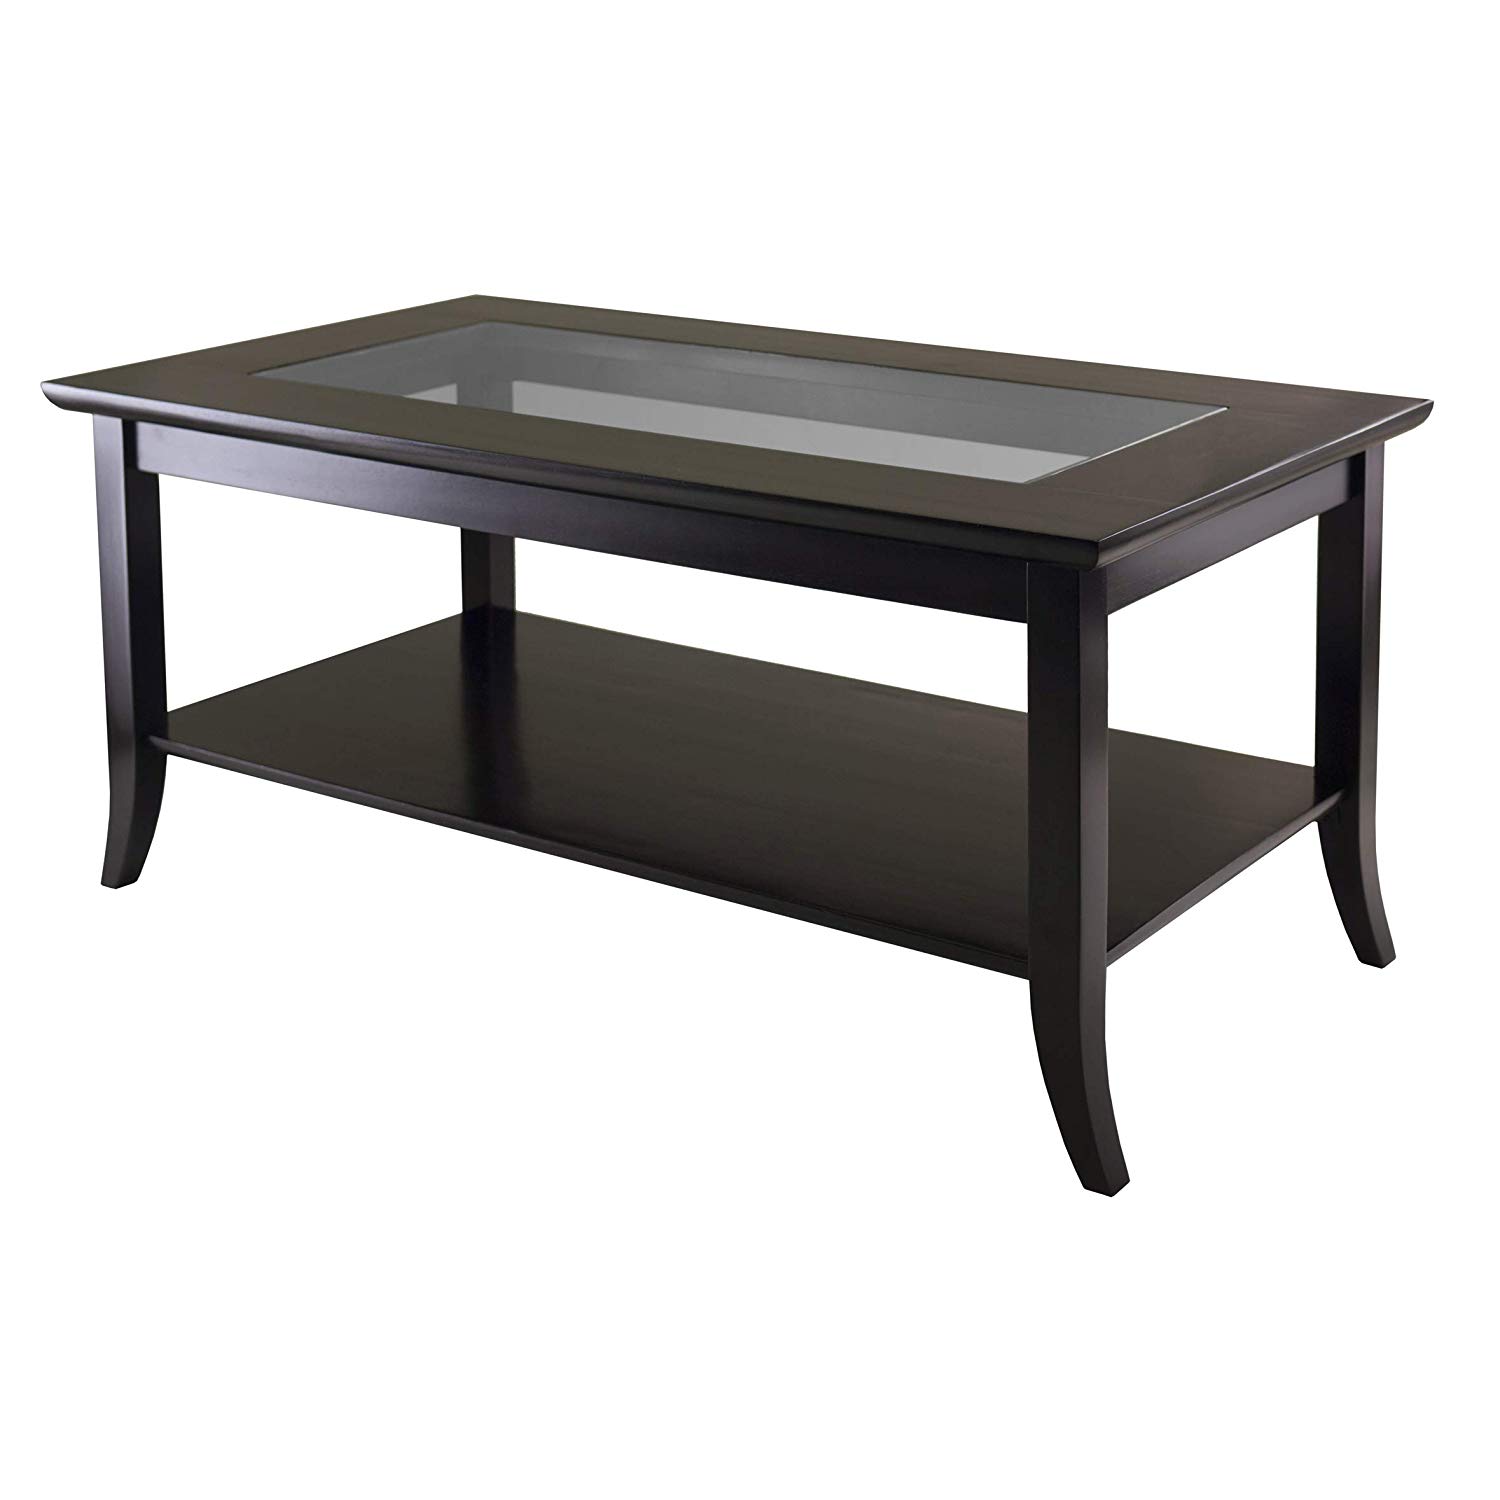 winsome genoa rectangular coffee table with glass top wood cassie accent cappuccino finish and shelf kitchen dining round cocktail linen cloth acrylic console dog kennel end